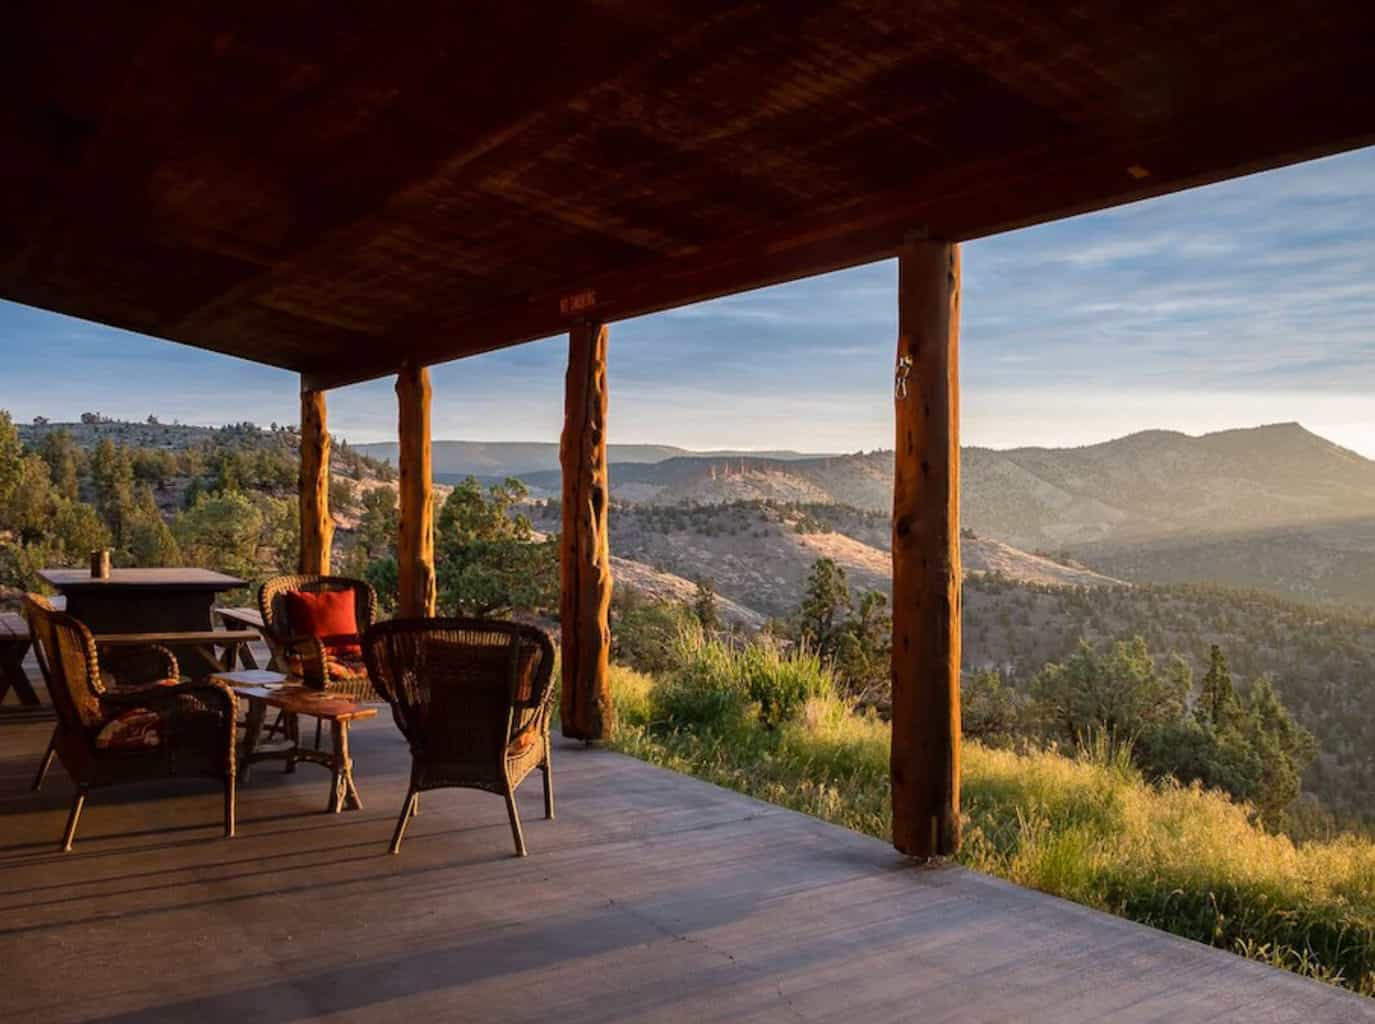 Sunset views on a patio looking out mountain views perfect for an intimate oregon airbnb wedding venue